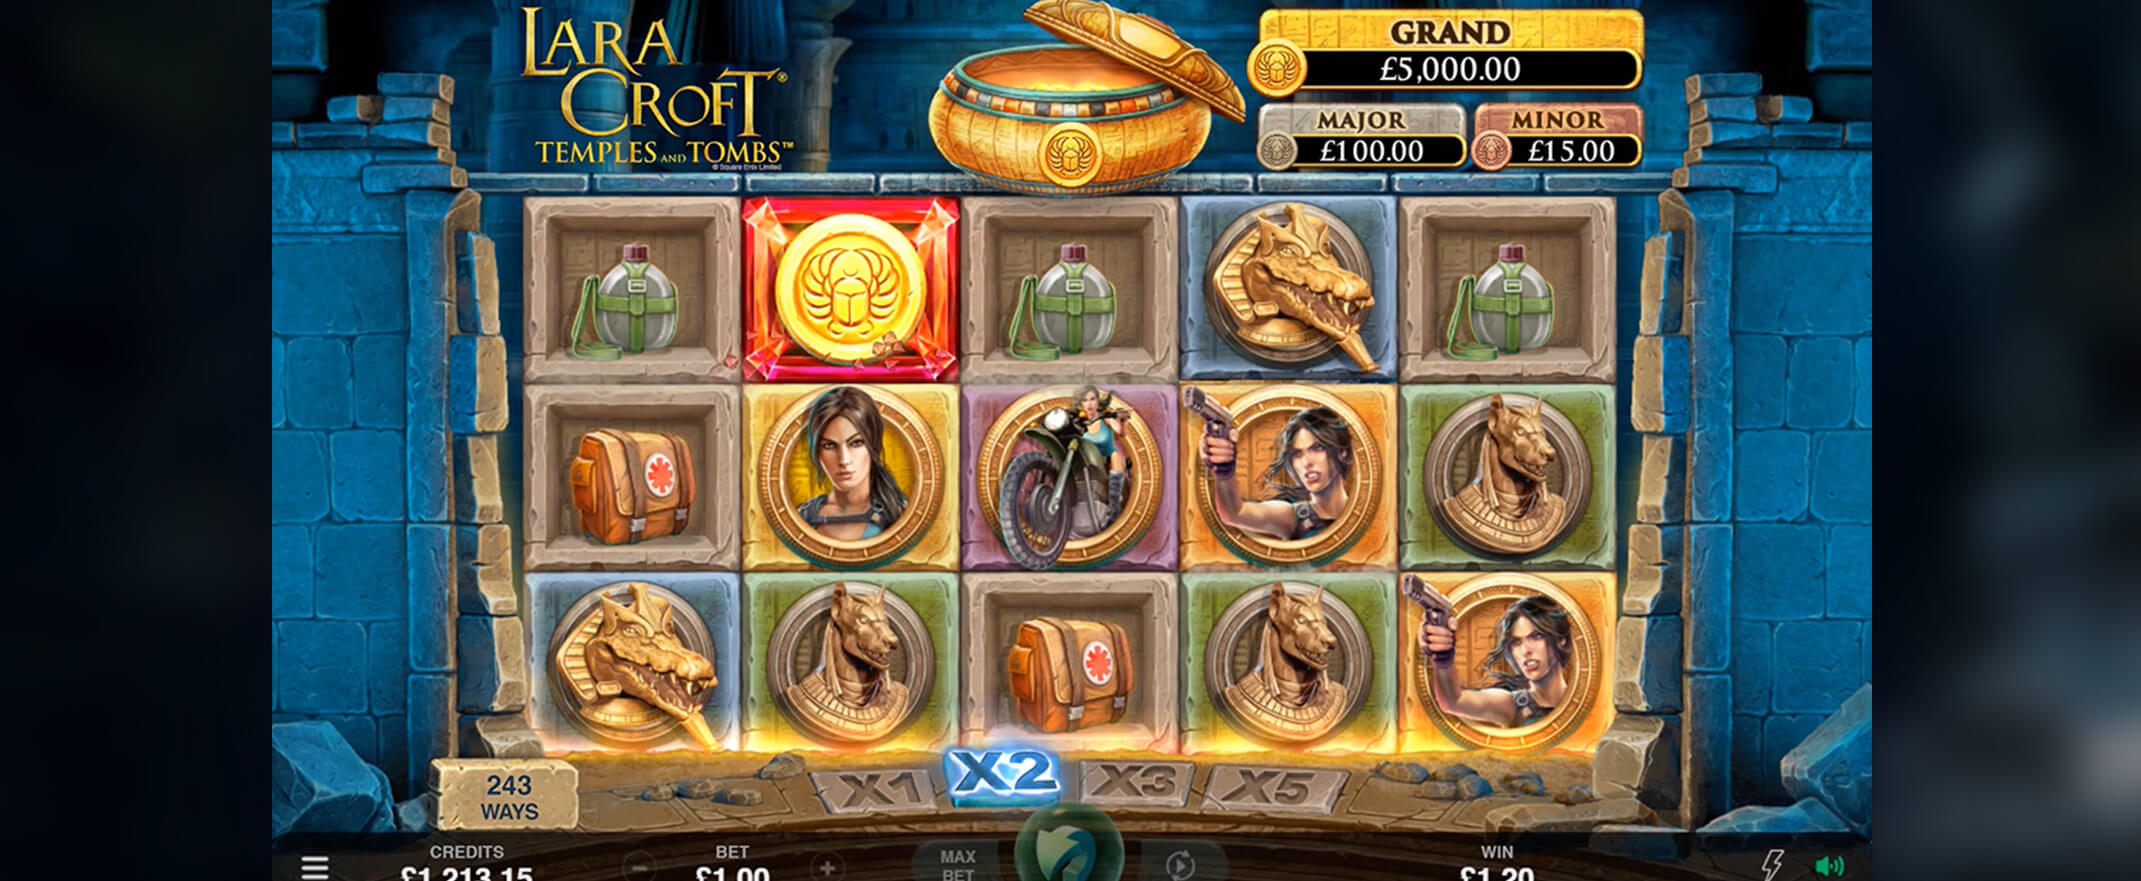 Lara Croft® Temples and Tombs video slot form Microgaming